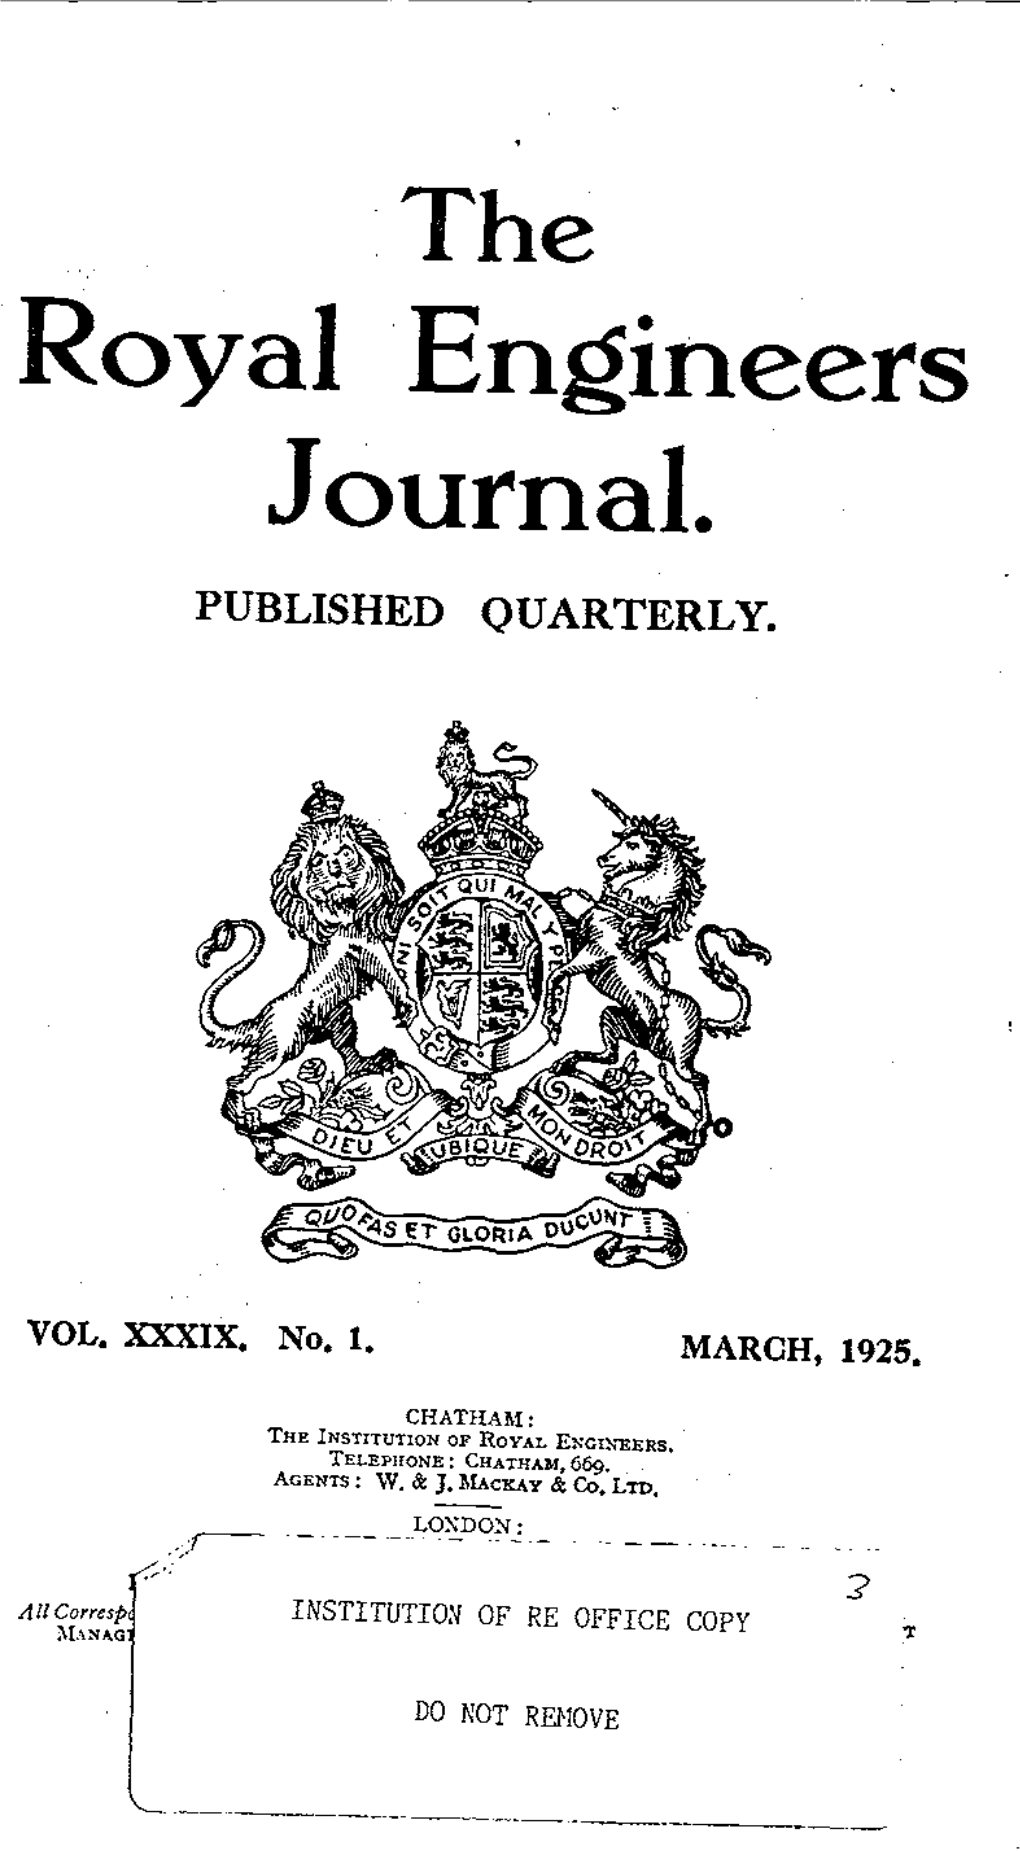 Royal Engineers Journal. PUBLISHED QUARTERLY